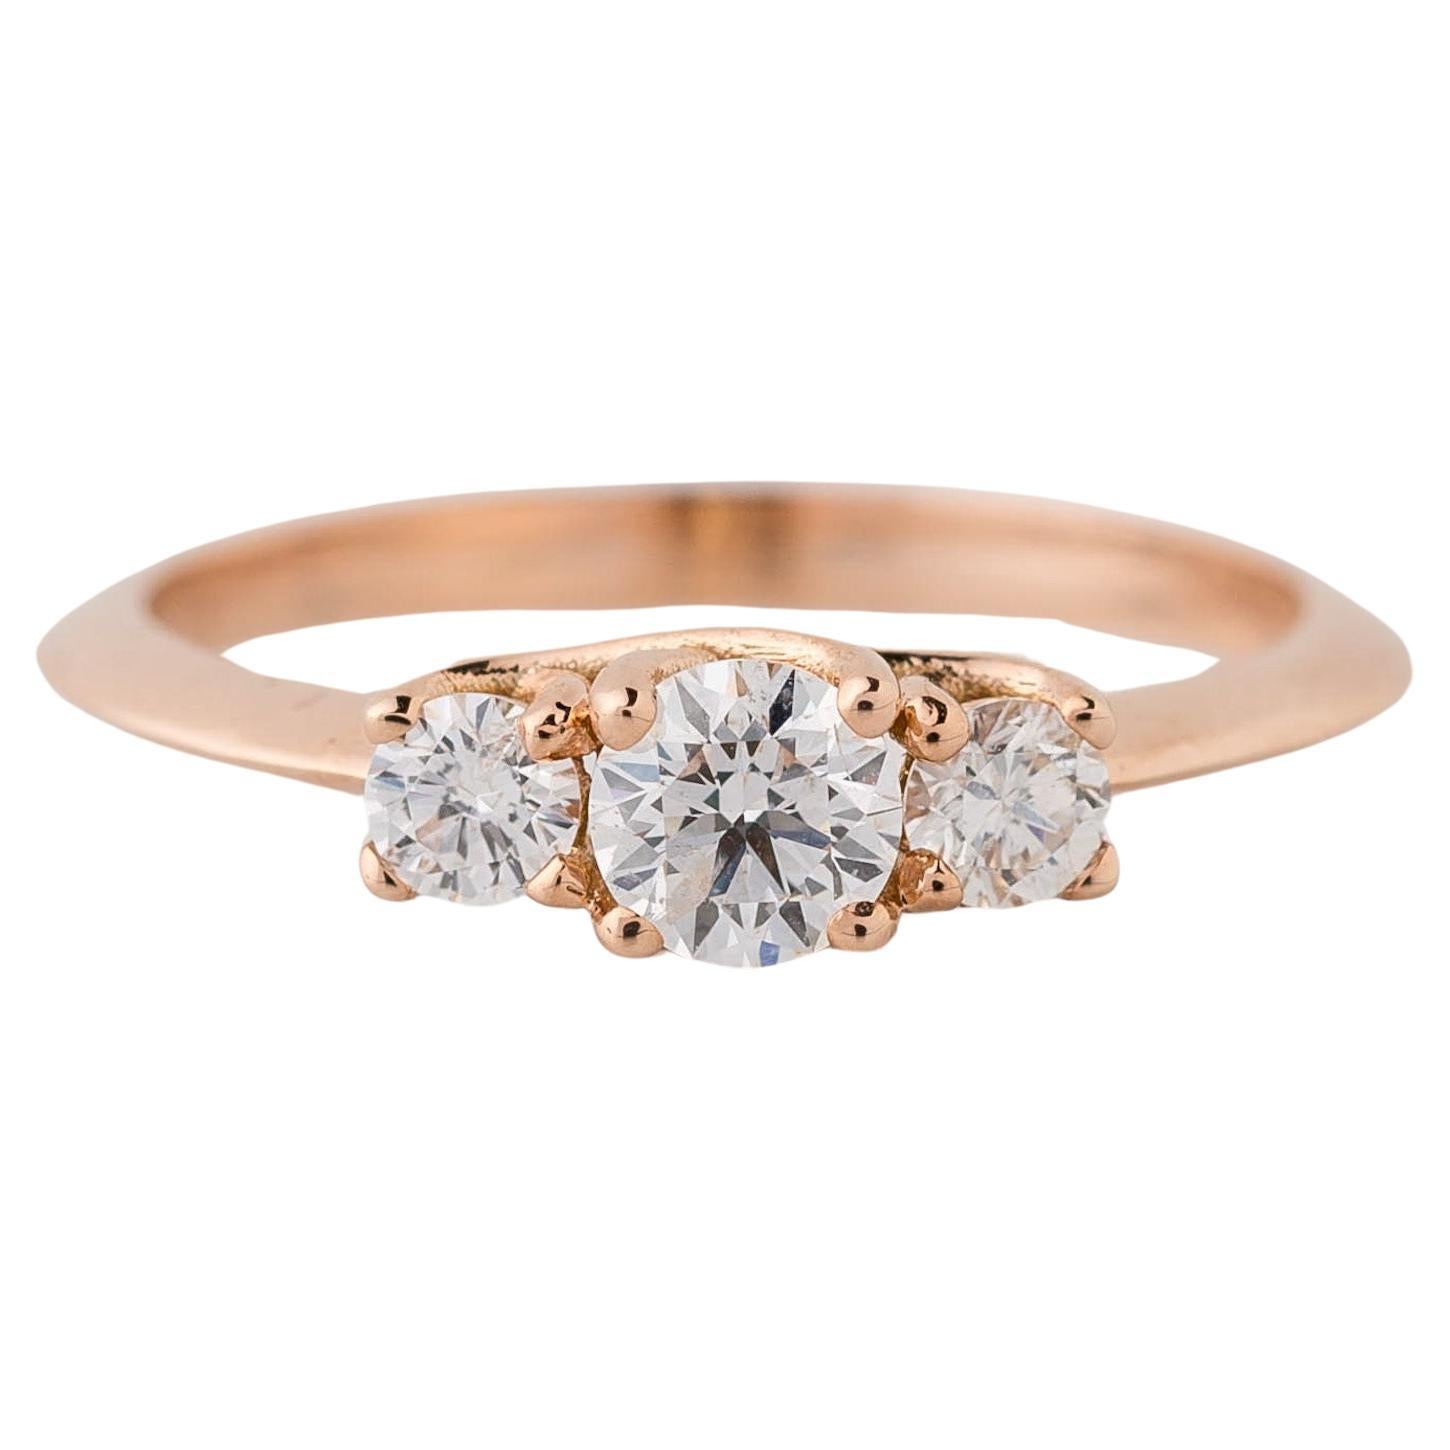 For Sale:  GIA Certified 0.52 Ctw  3-Stone Diamond Engagement Ring in 14K Rose Gold